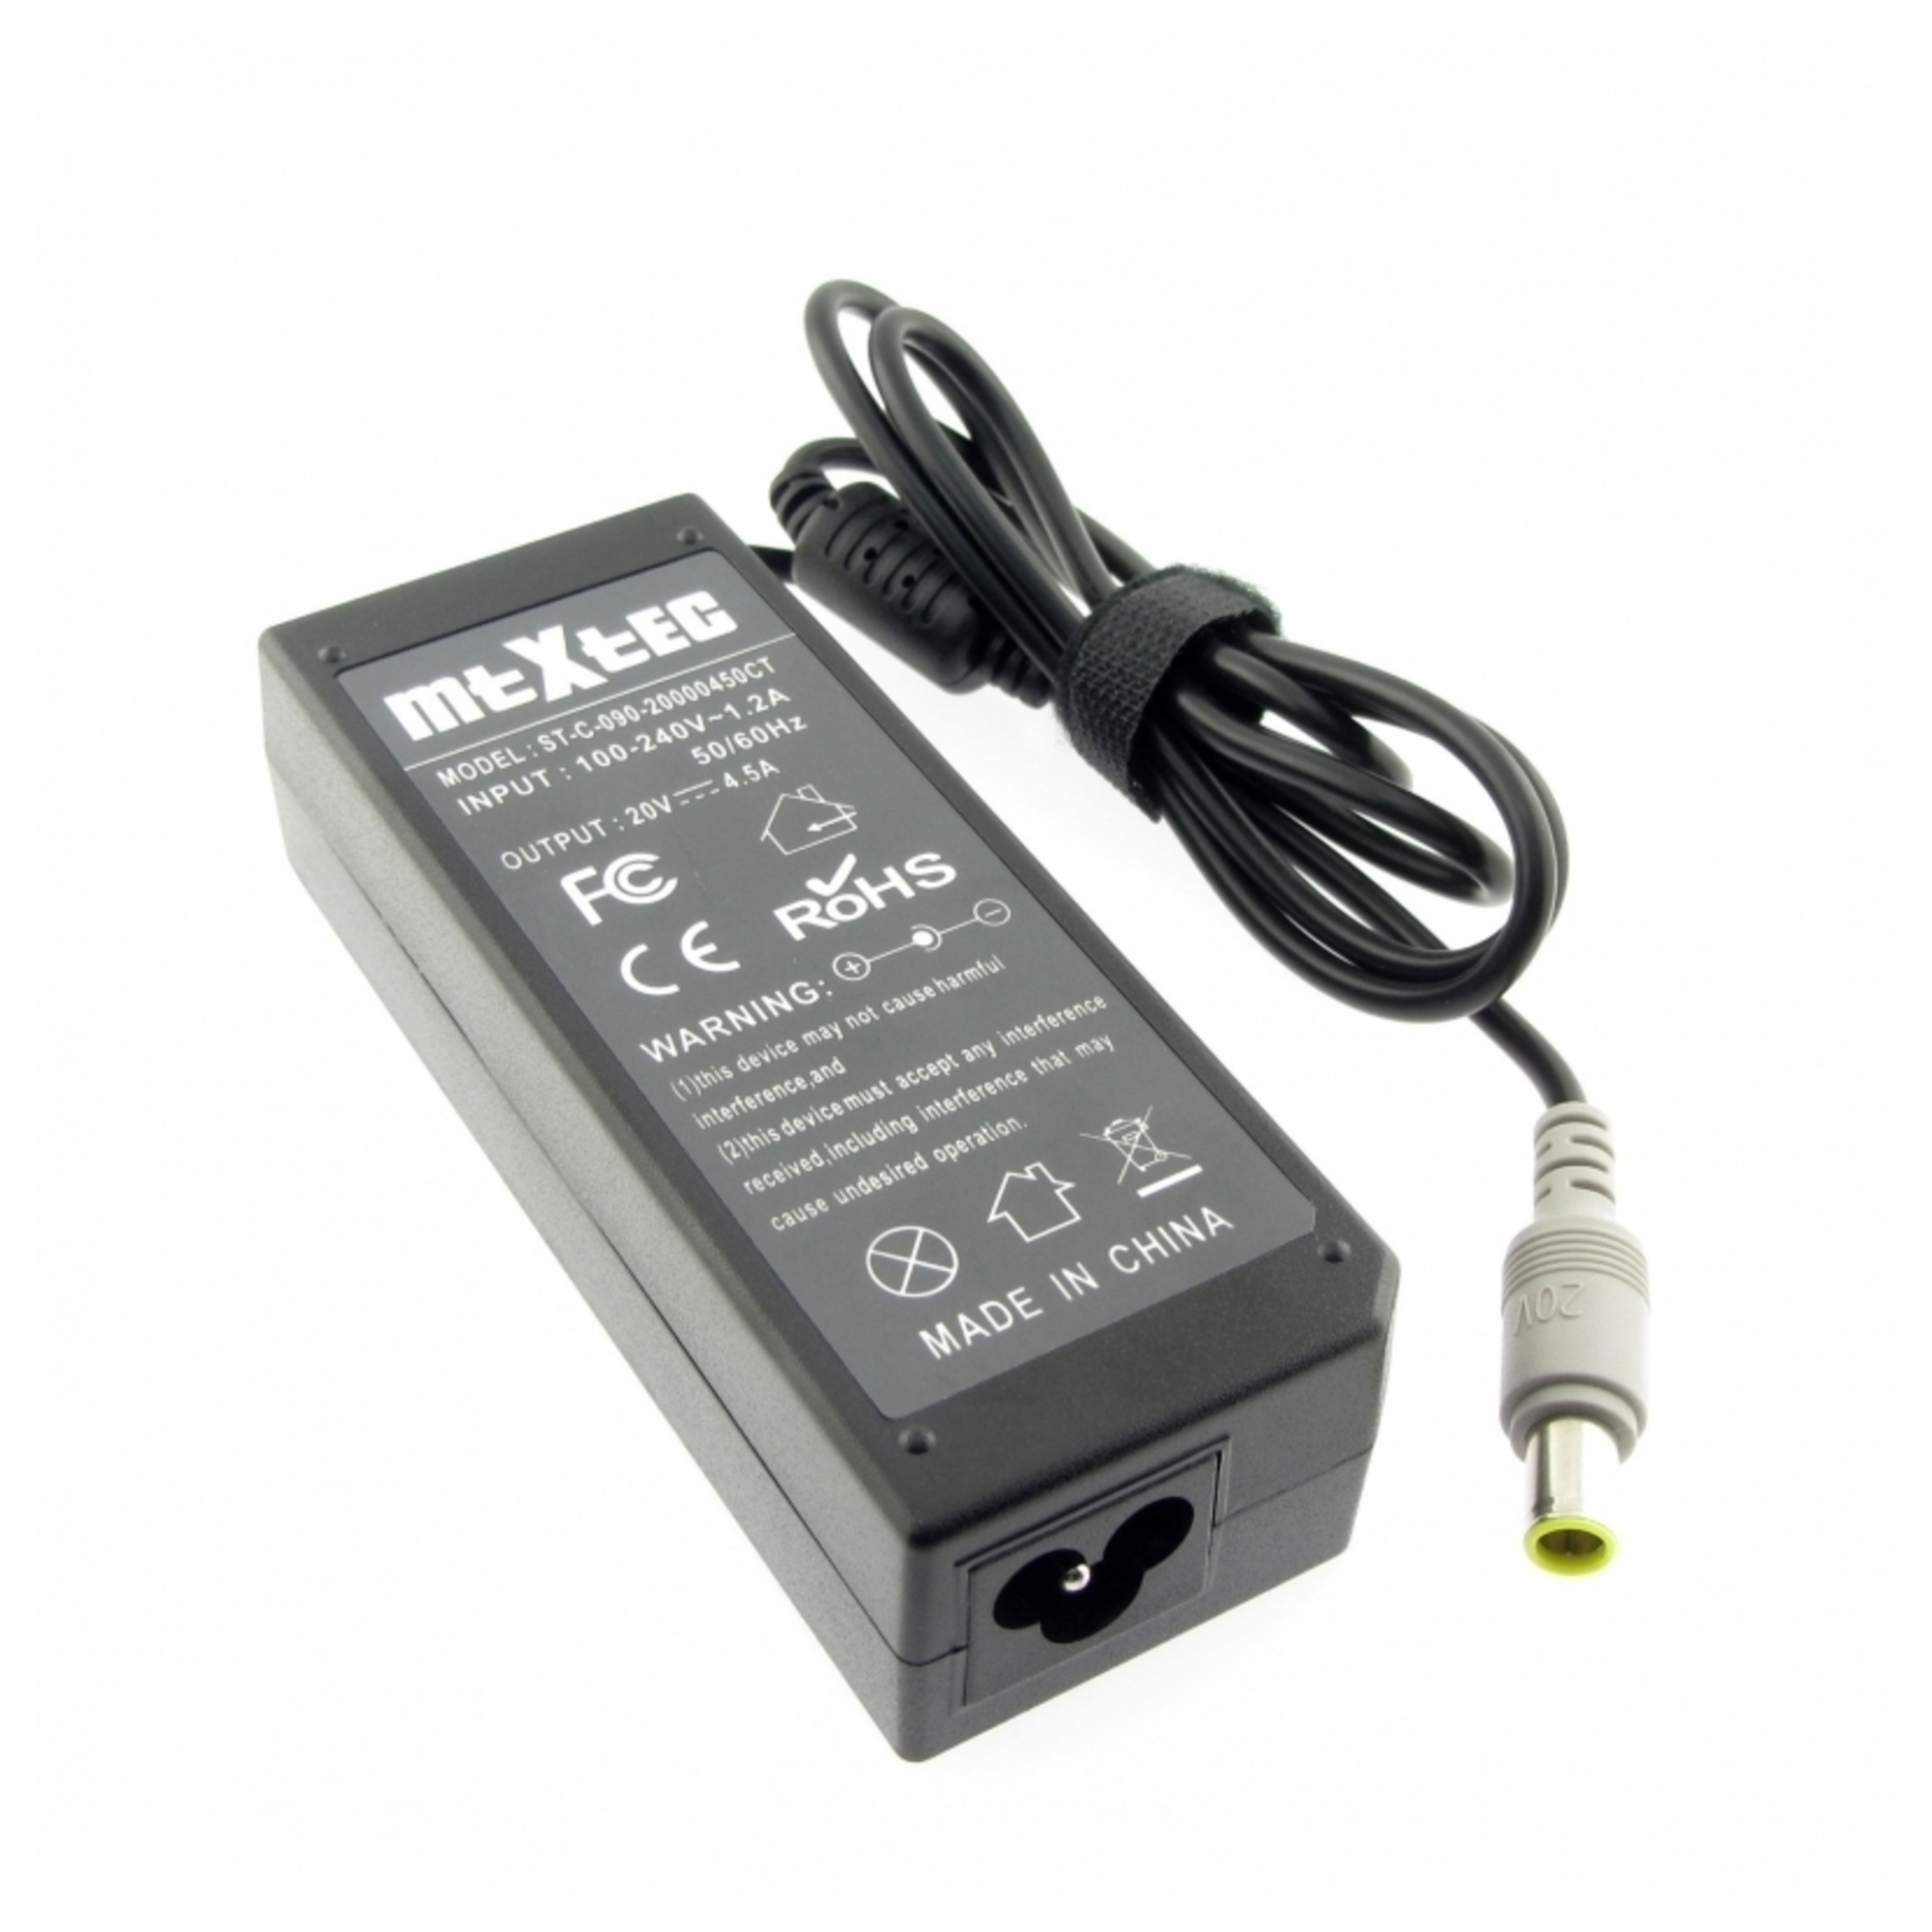 mtxtec charger (power supply), 20v, 4.5a for lenovo thinkpad sl510 (2847), connector 7.4 x 5.5 mm round - neuf